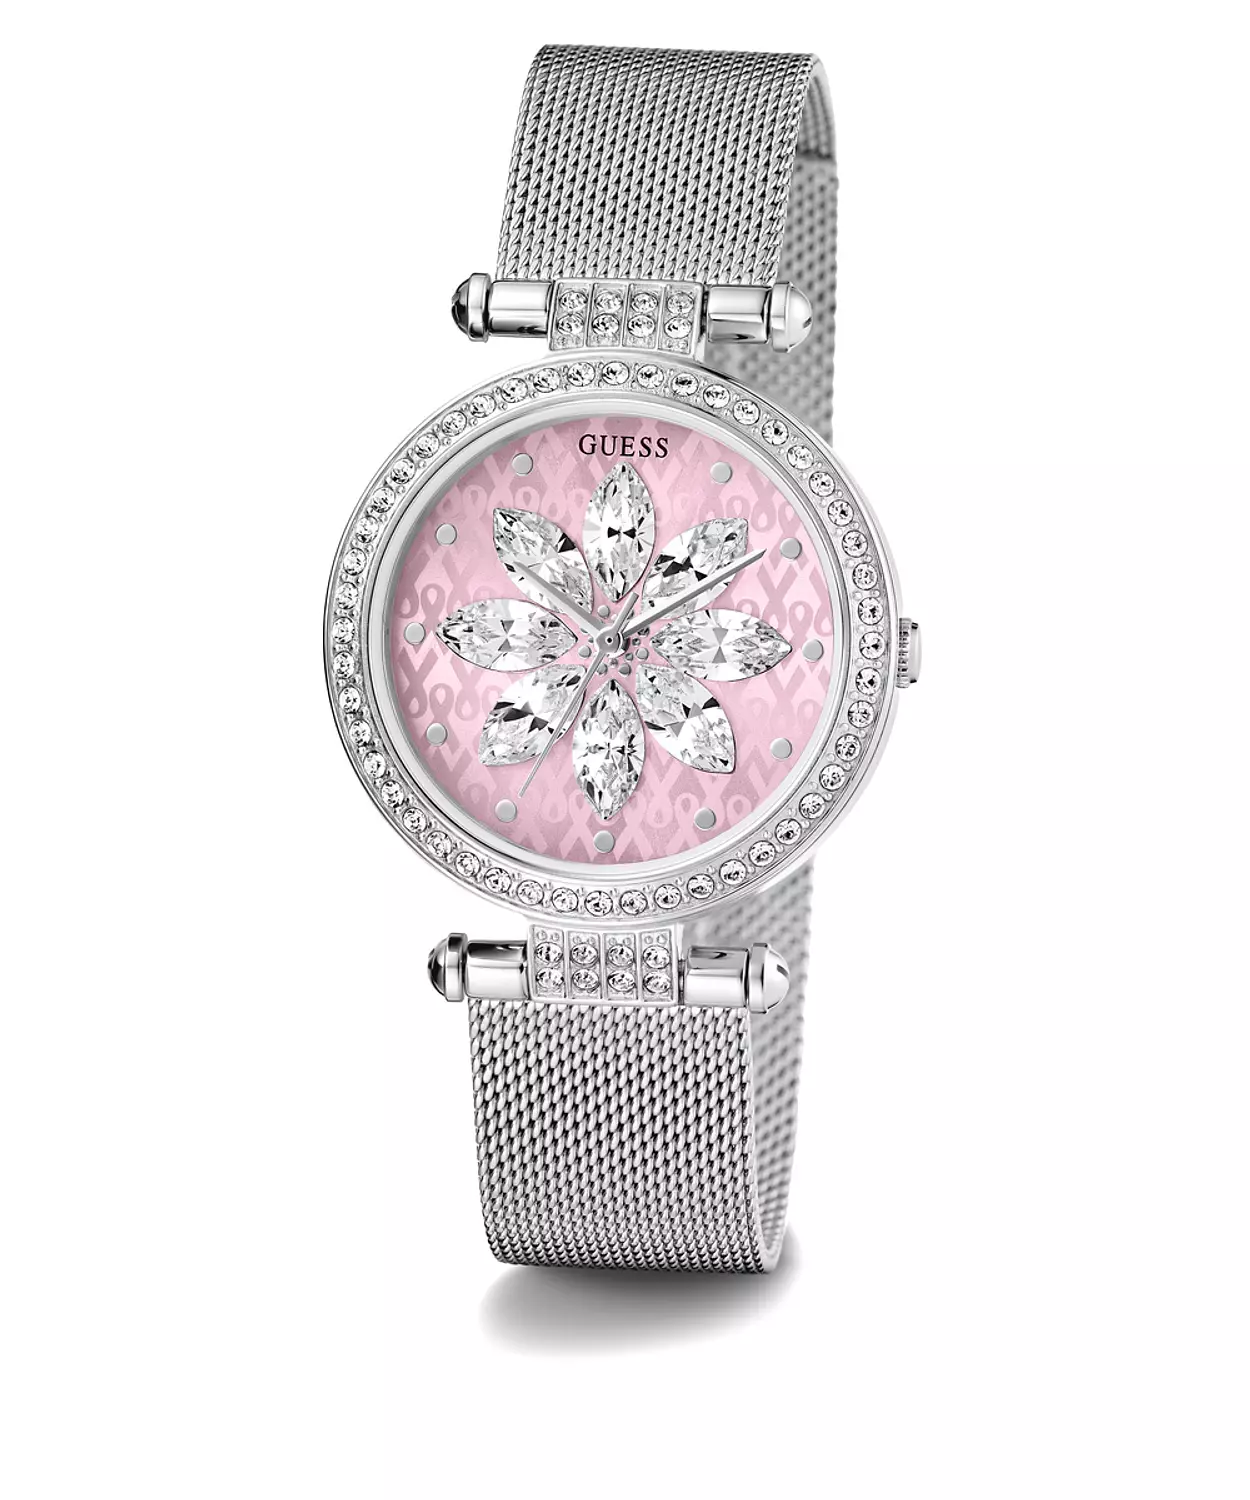 GUESS GW0032L3 ANALOG WATCH For Women Round Shape Silver Stainless Steel/Mesh Polished Bracelet 4